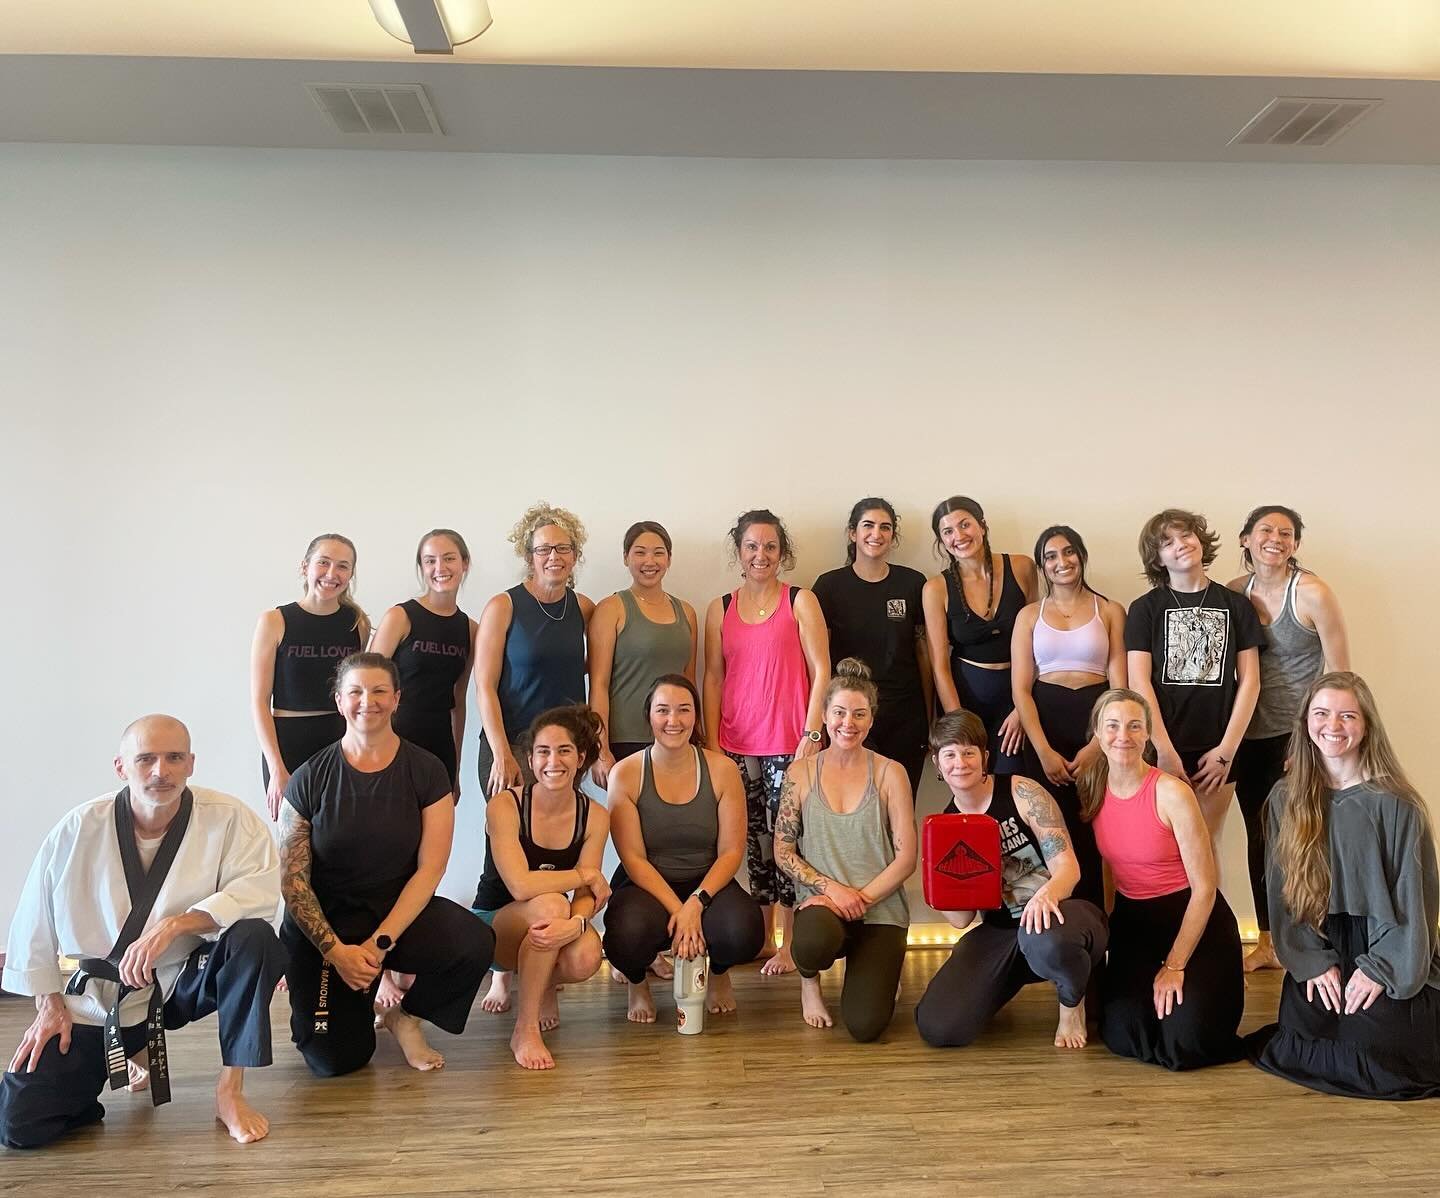 Huge thanks to all yoga students who joined us this afternoon for our self-defense workshop! It was fantastic to see the community come together to learn valuable skills. Special thanks to Jason Hughes from Live Oak Martial Arts @lomaathens for shari